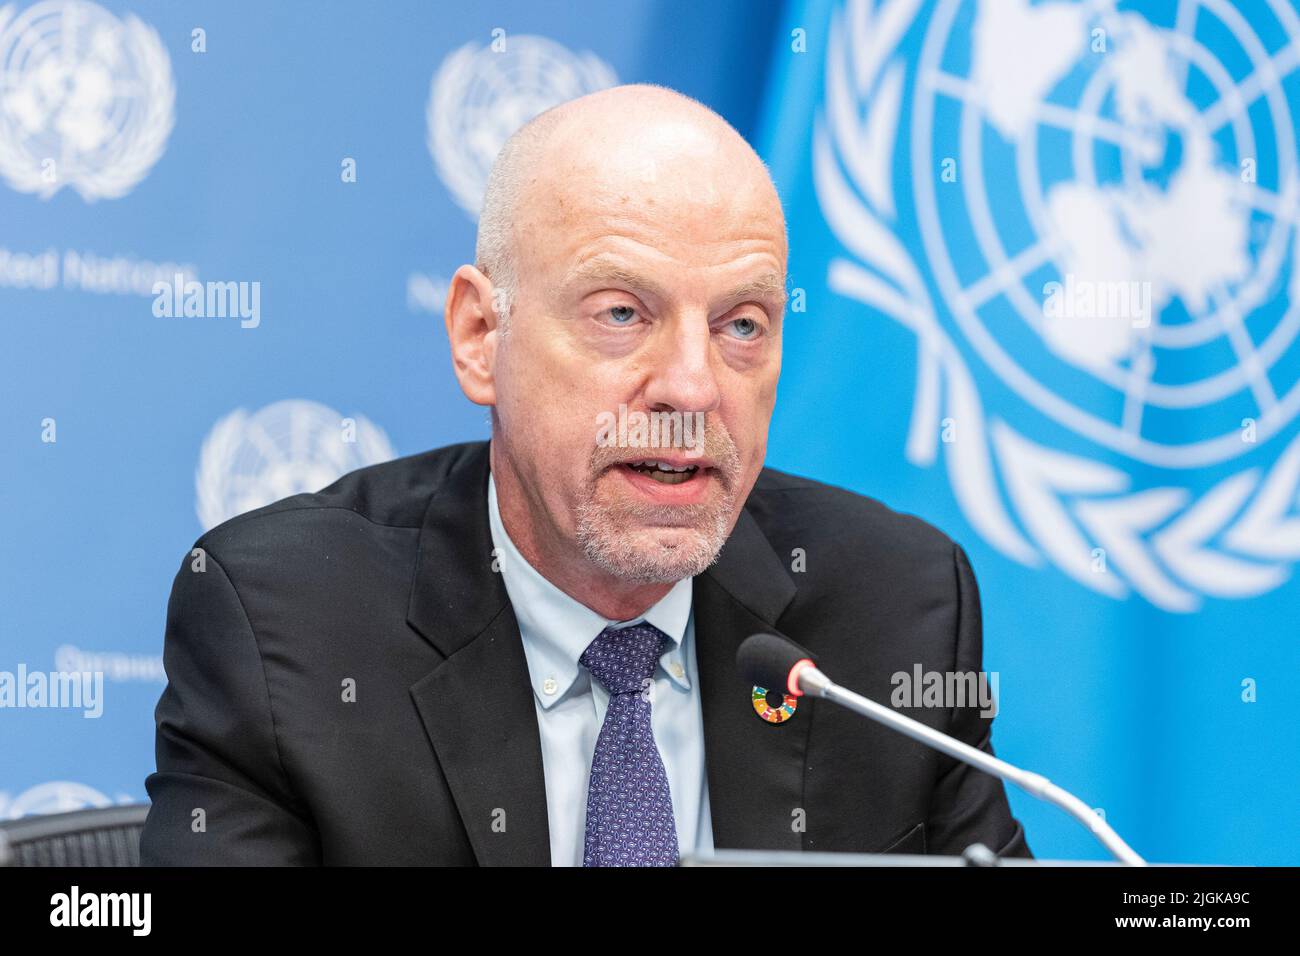 John Wilmoth, Director, Population Division, Department of Economic and Social Affairs speaks at press briefing on the launch of the World Population Prospects 2022 at UN Headquarters in New York on July 11, 2022. He was joined by Maria-Francesca Spatolisano, UN Assistant-Secretary-General for Policy Coordination and Inter-Agency Affairs and Patrick Gerland, Chief, Population Estimates and Projection Section, Population Division, Department of Economic and Social Affairs . They brief the media on the occasion of World Population Day. The UN projects that on November 15, 2022 Population of the Stock Photo